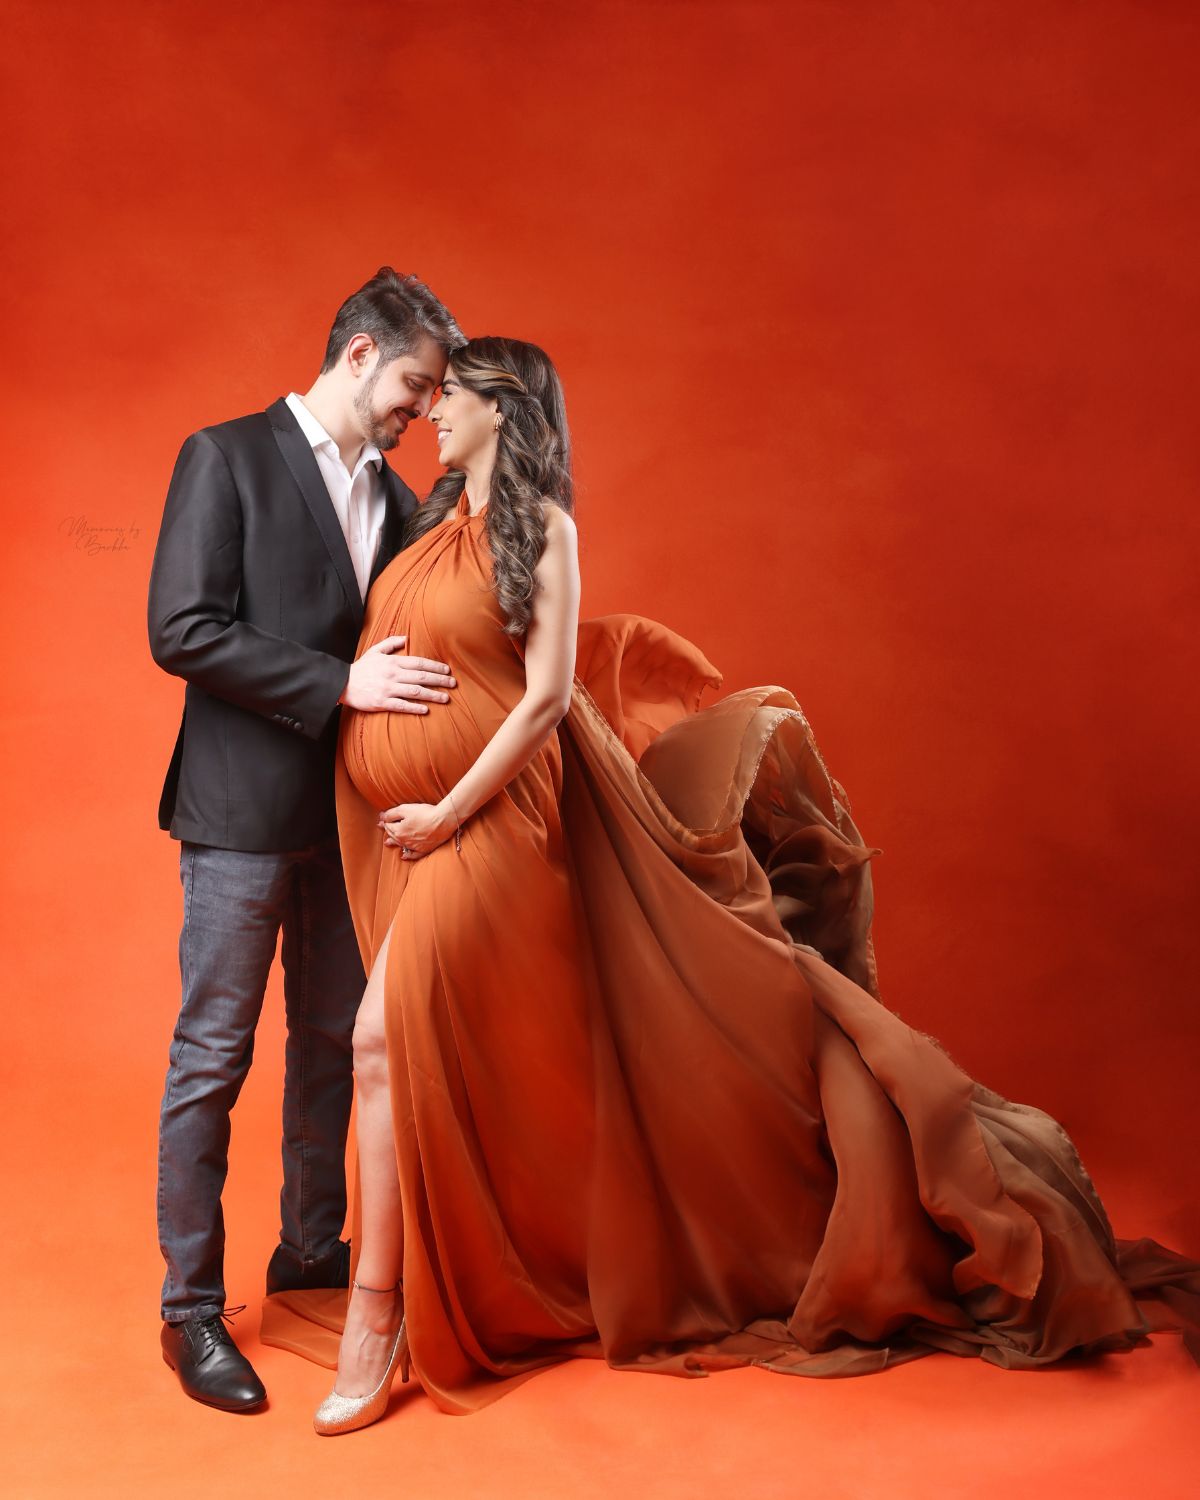 Capturing the Essence Introducing Maternity Photoshoots